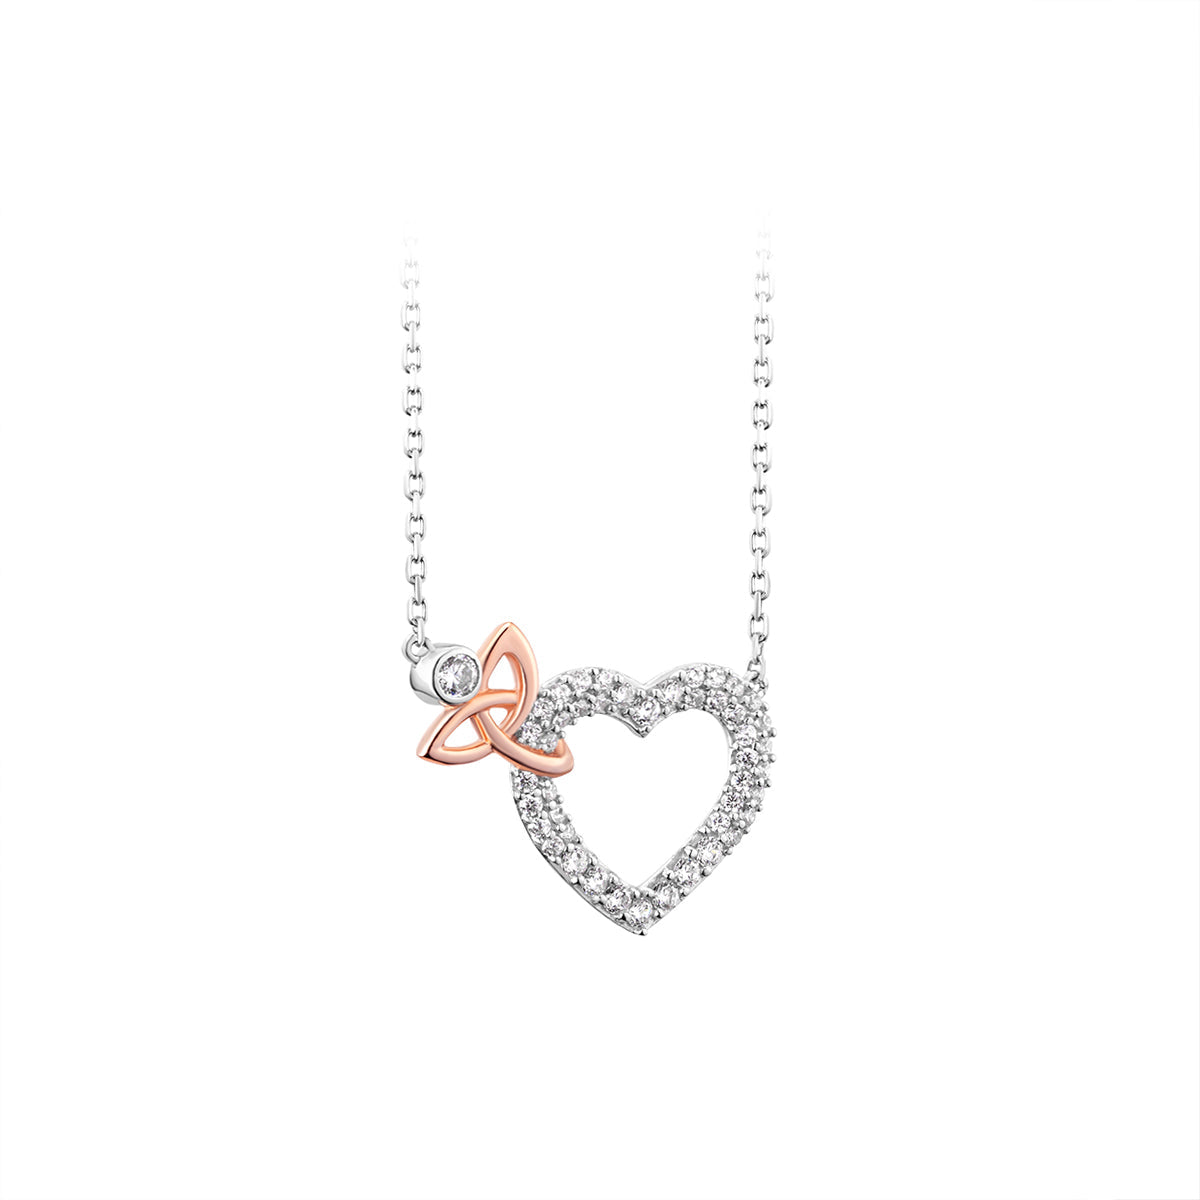 Stock image of sterling silver Celtic Crystal heart necklet S46917 made by Solvar jewellery